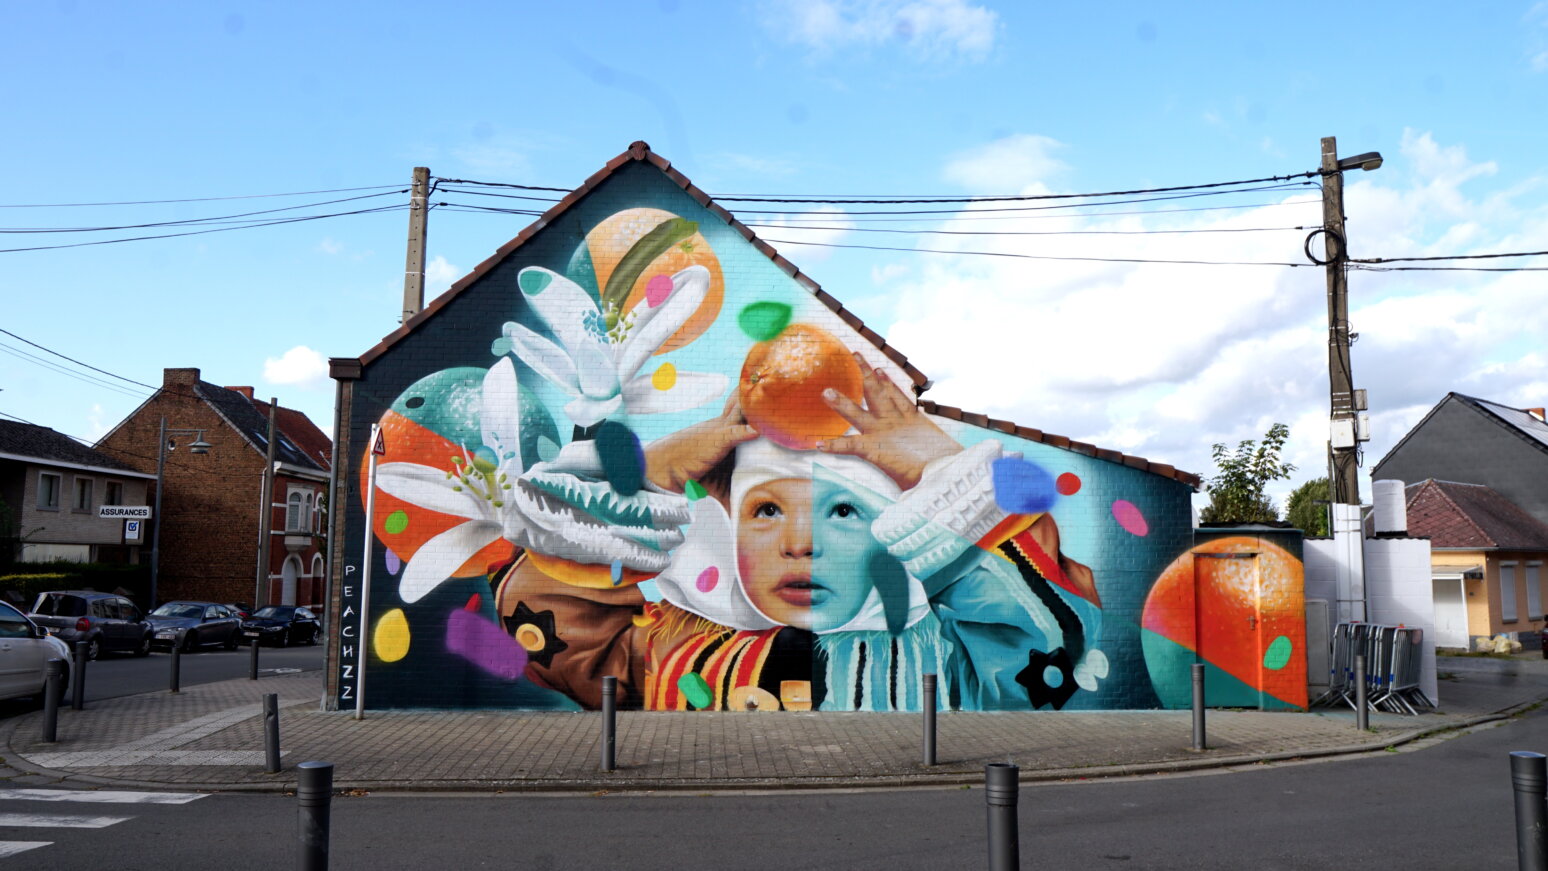 A brightly coloured painting on the side of a building featuring a child and oranges.